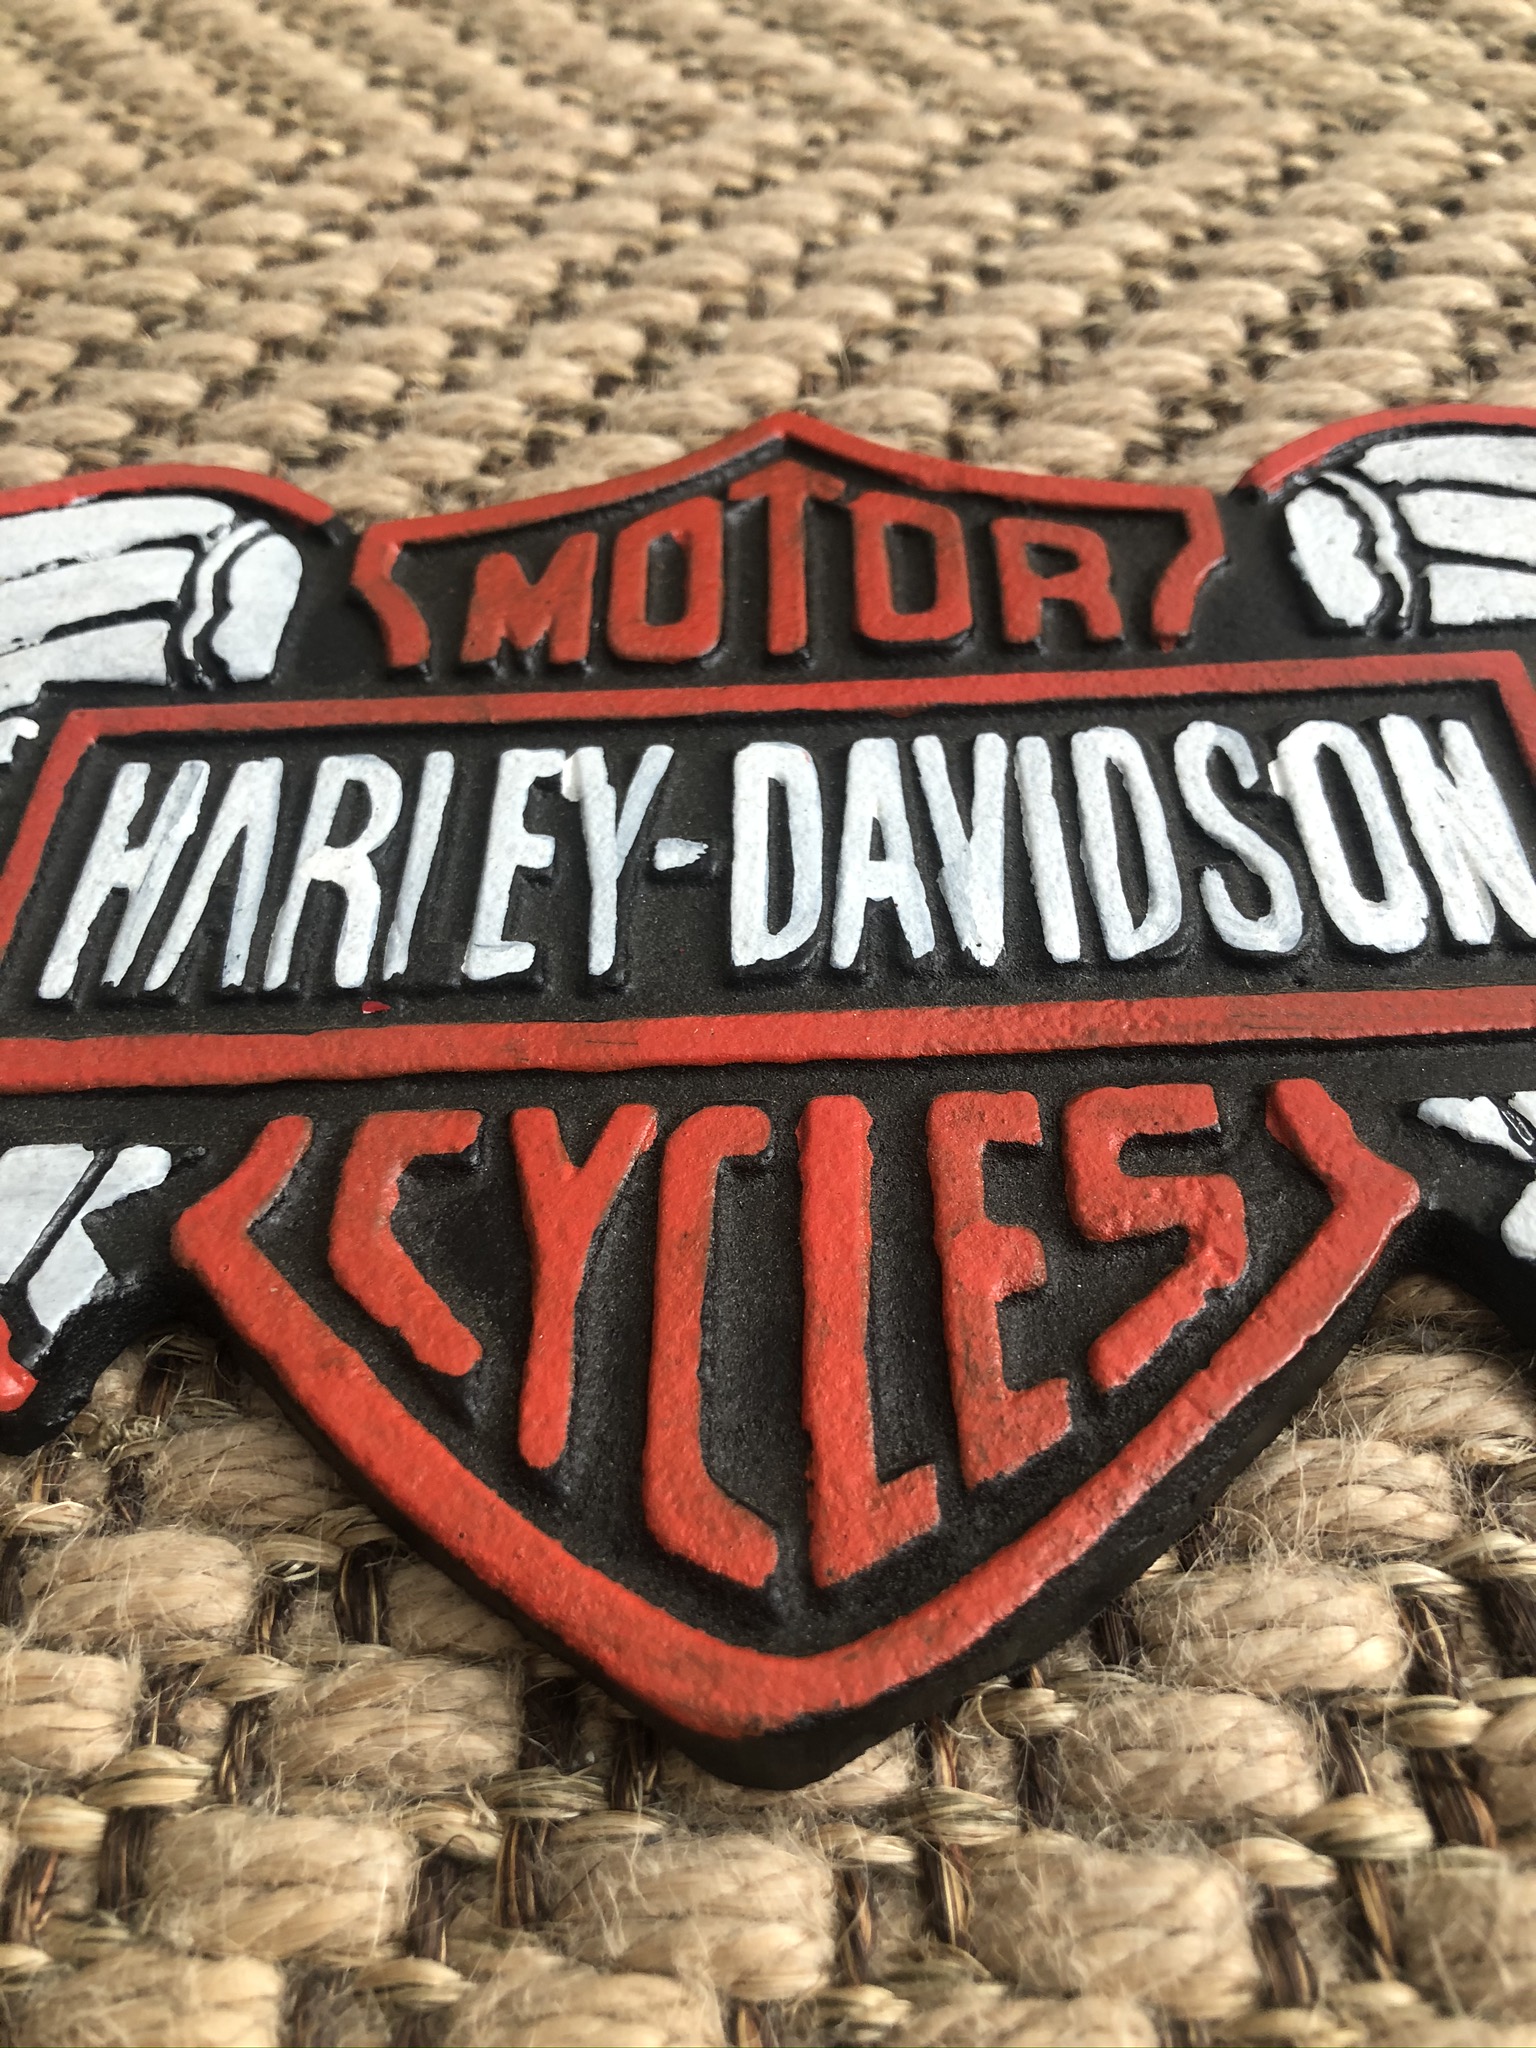 Cast Iron Harley Davidson Motorcycles Large Wall Plaque - Image 2 of 3